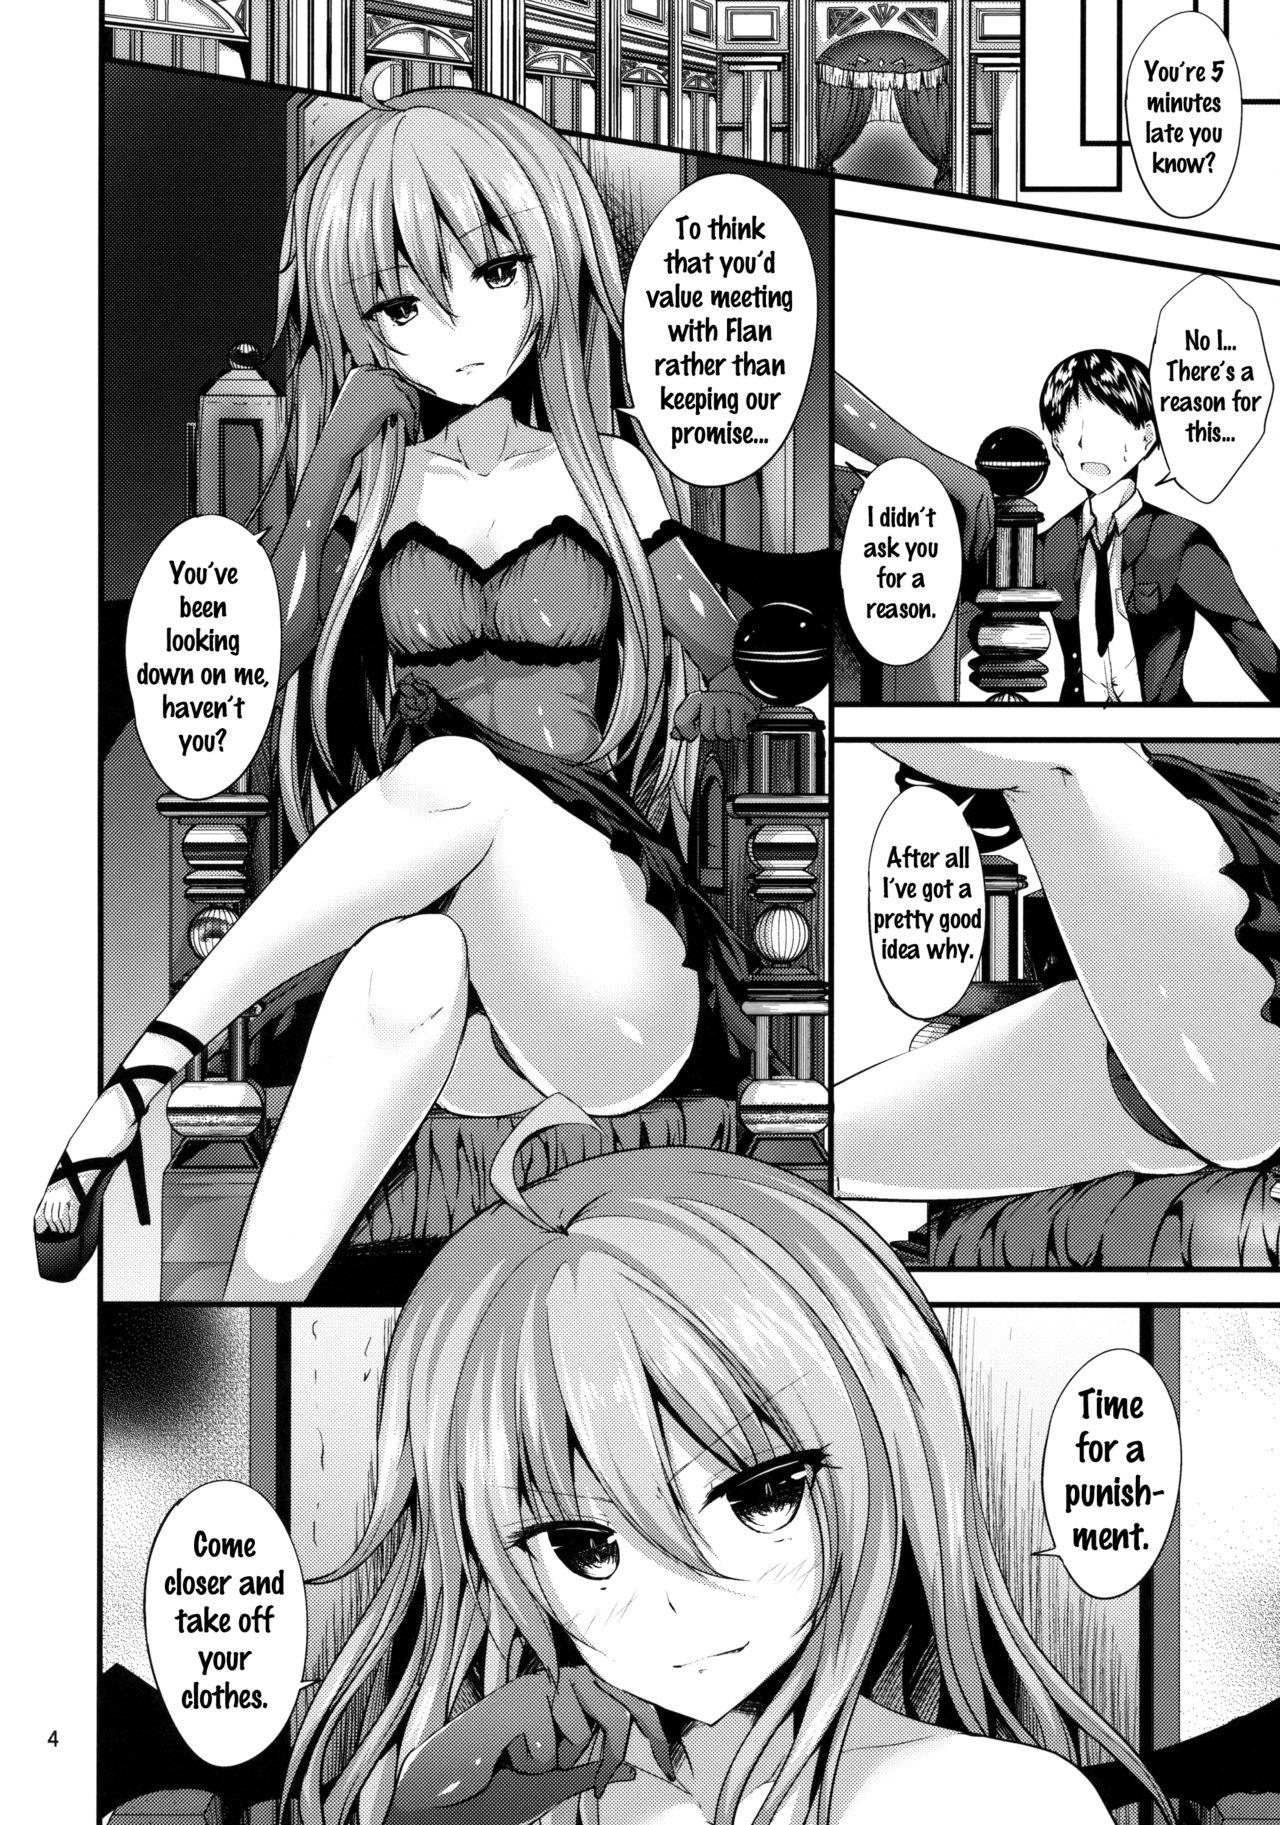 Yanks Featured Remi no Motto Otona ni Narumon! | Remi's Becoming More of An Adult! - Touhou project Insertion - Page 3